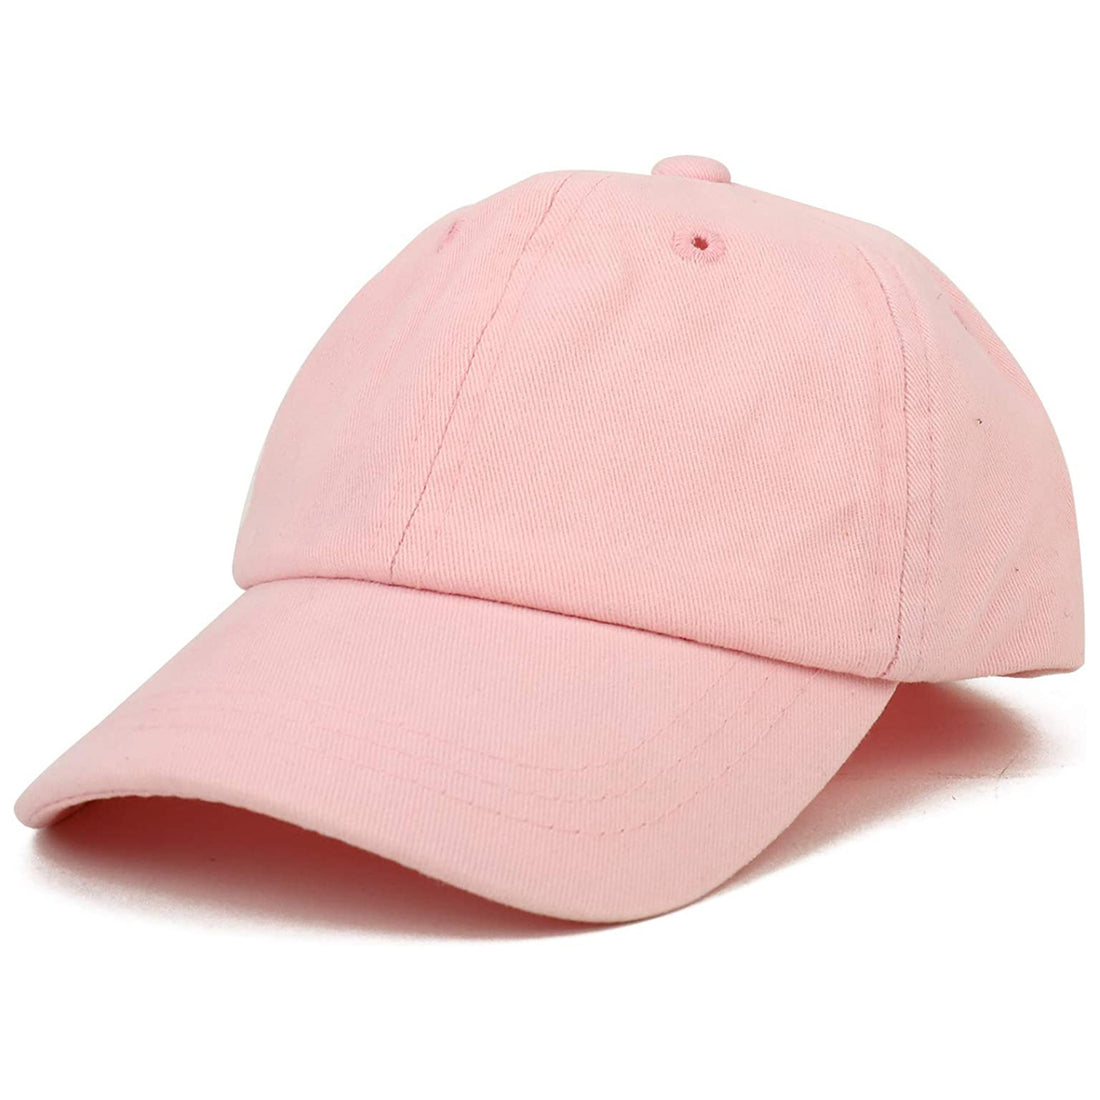 Trendy Apparel Shop Infant Size Unstructured Pigment Dyed Washed Baseball Cap